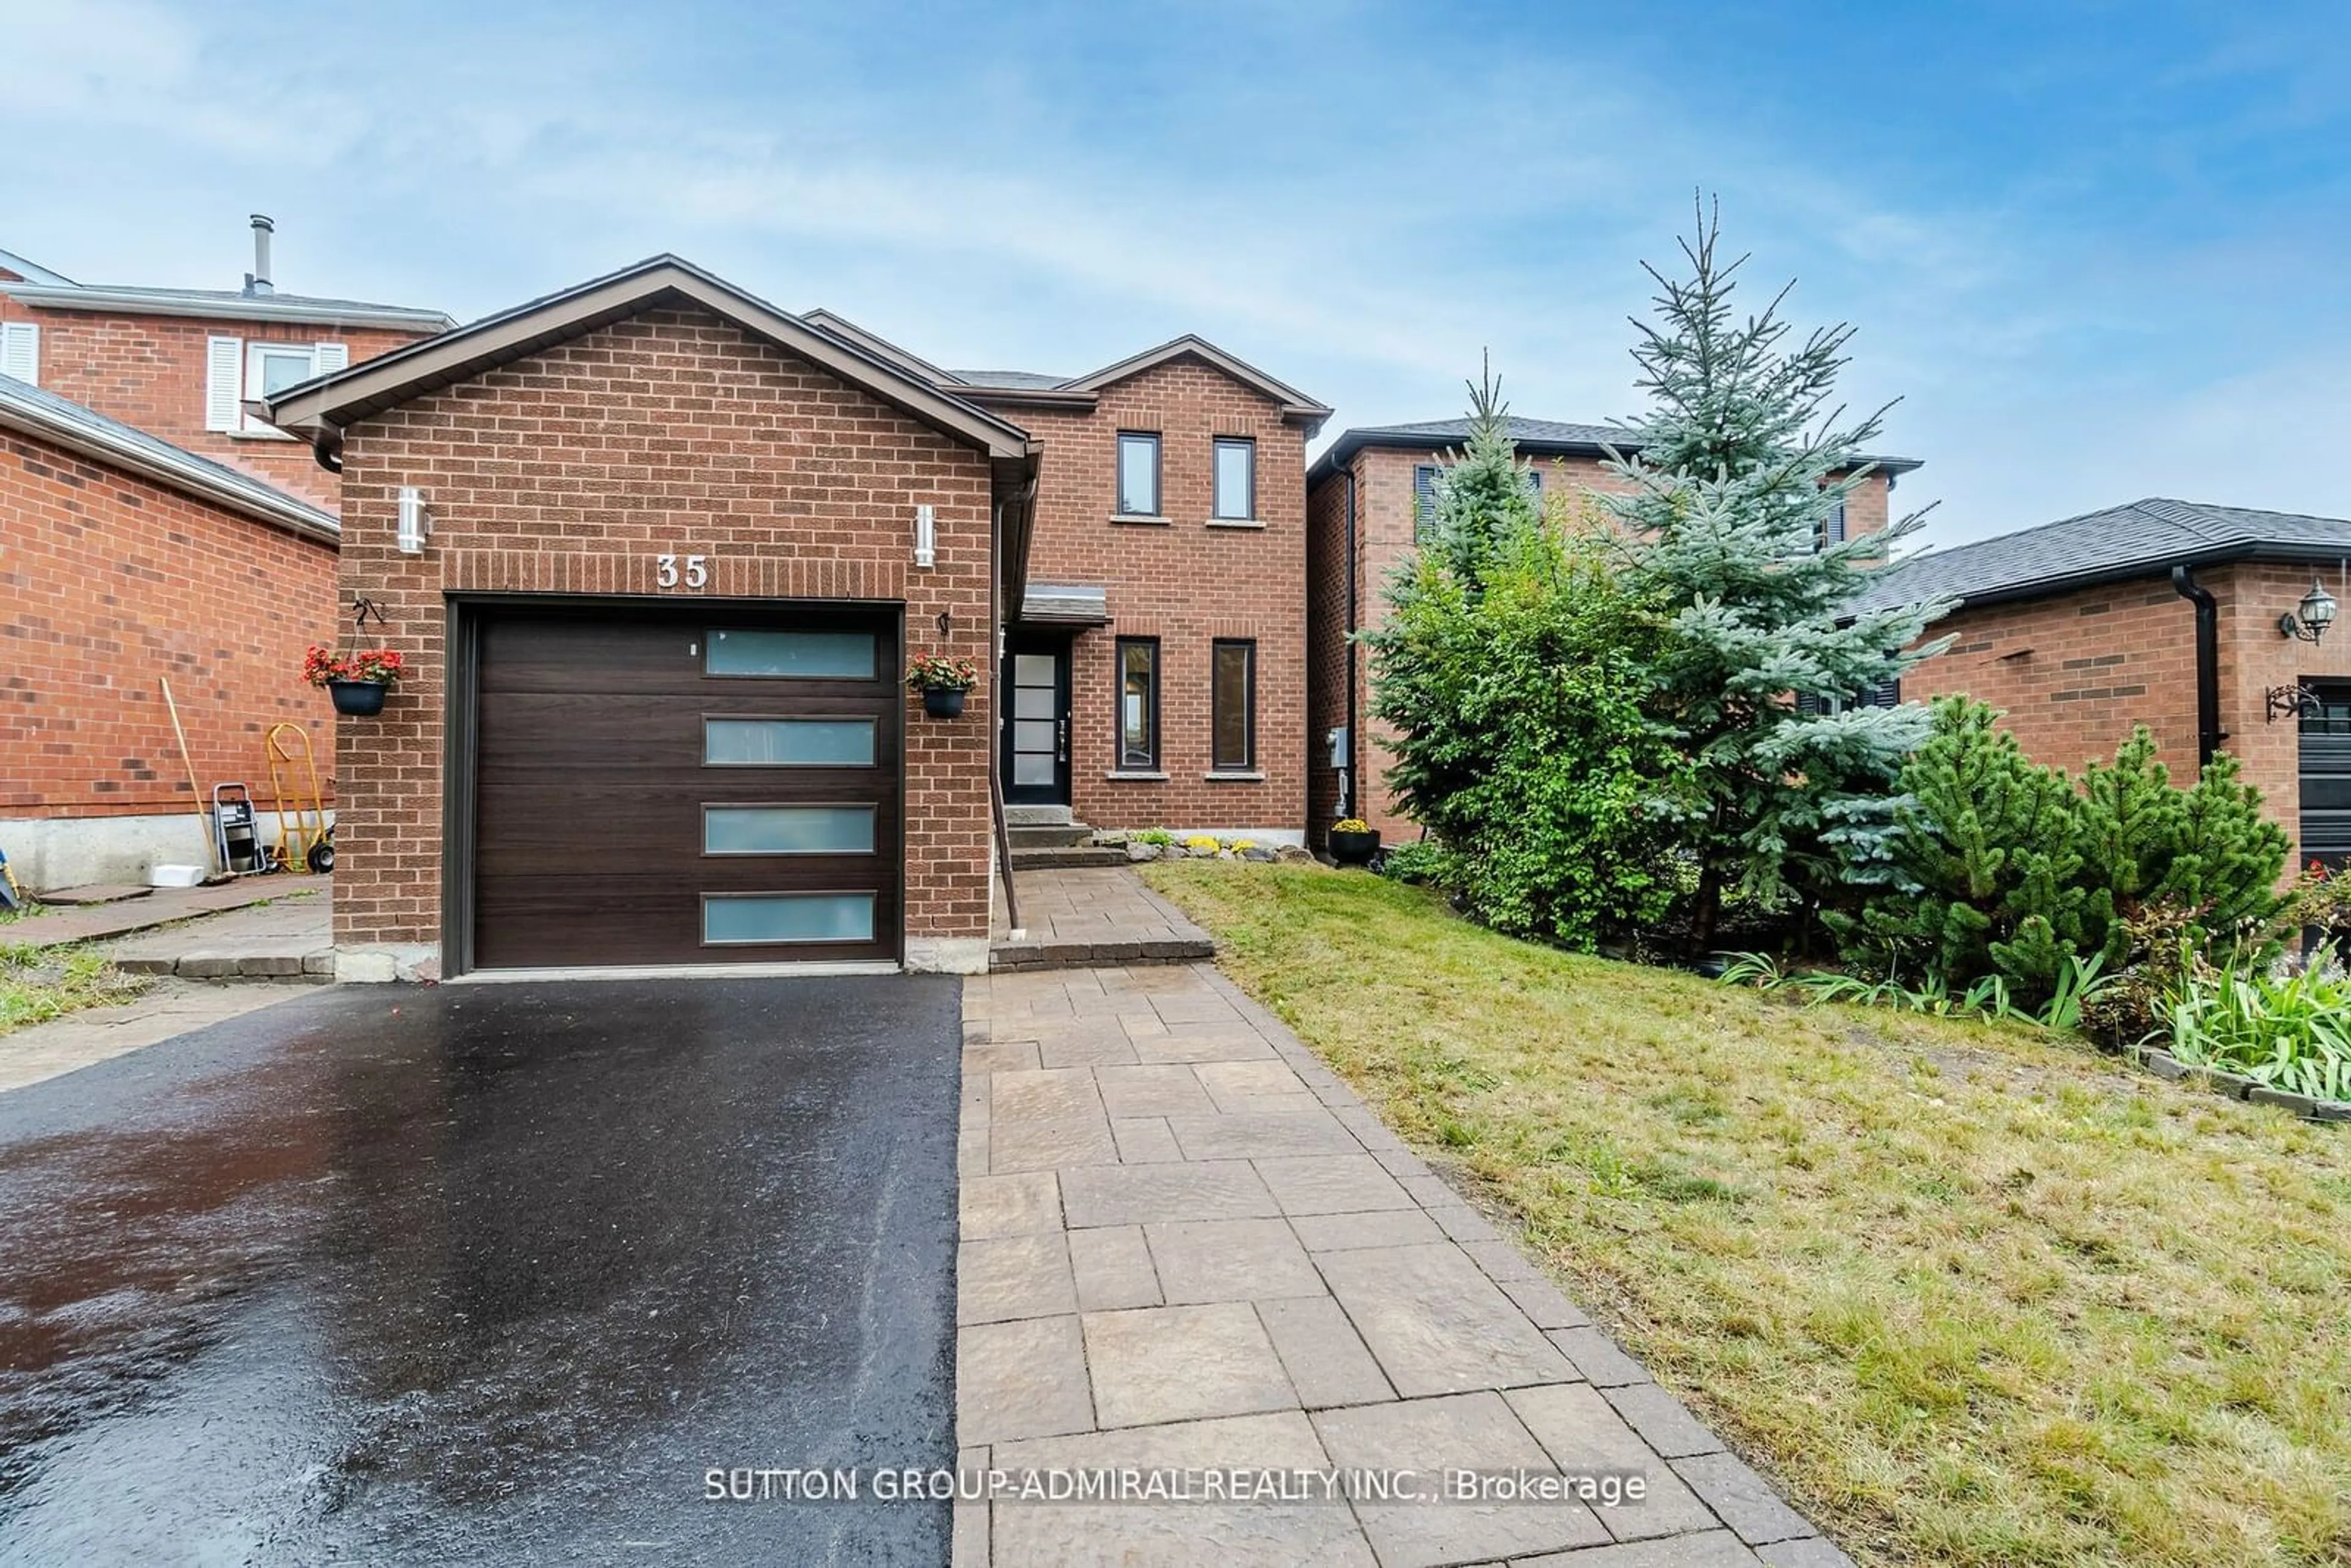 Home with brick exterior material for 35 Fernbank Pl, Whitby Ontario L1R 1T1